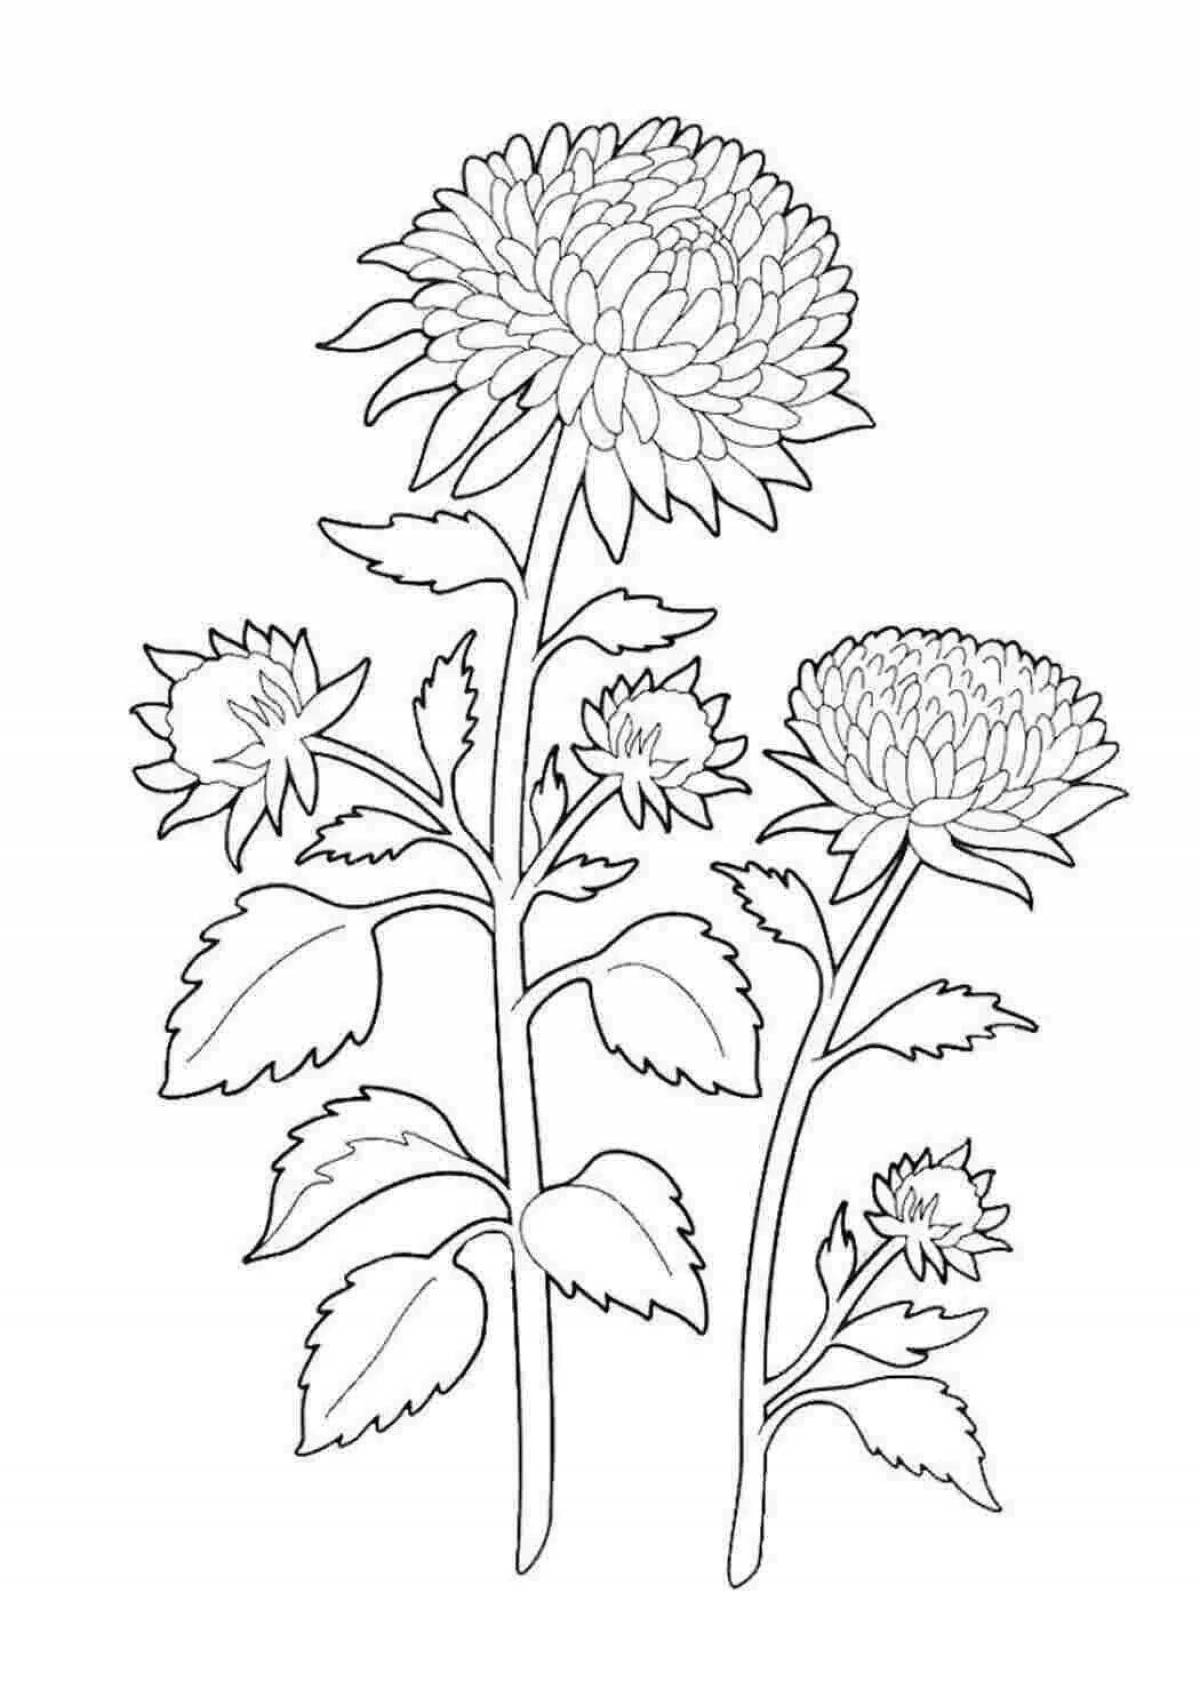 Colorful shiny garden flowers coloring page